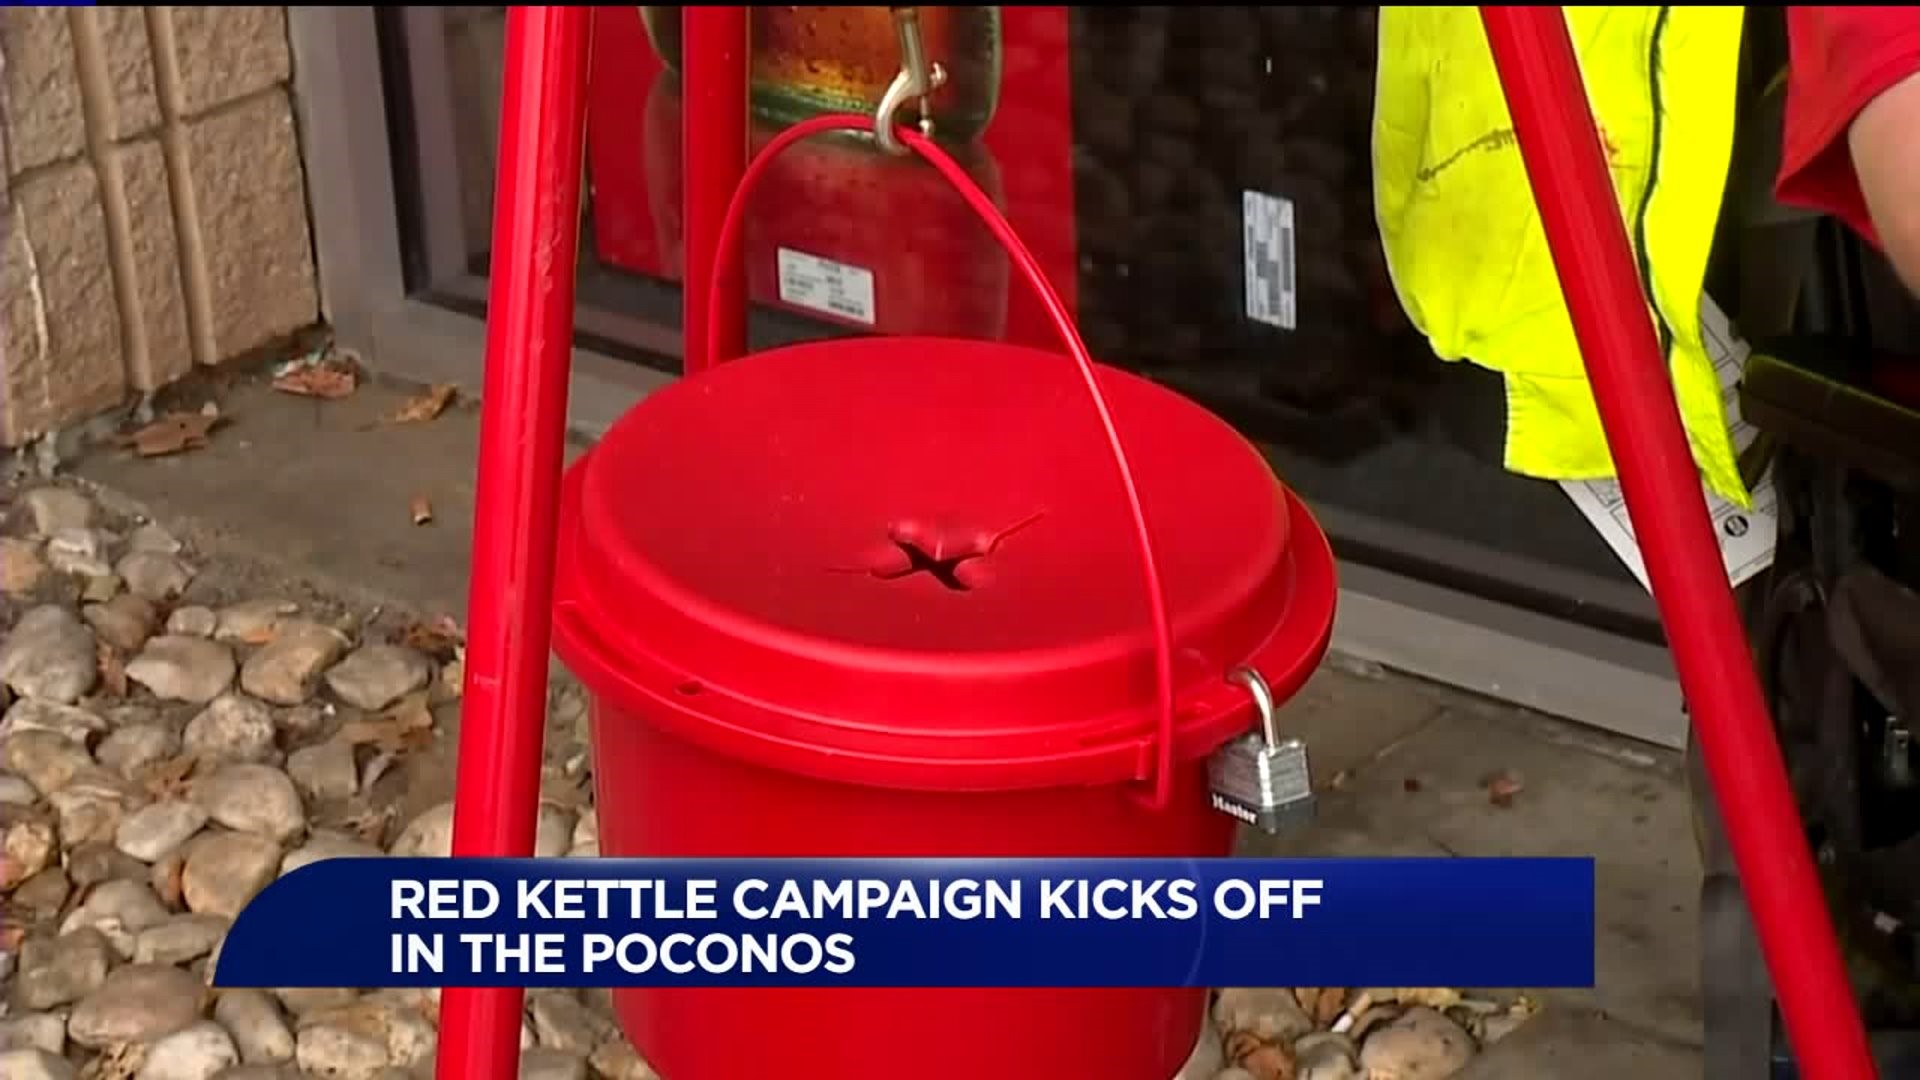 Red Kettle Campaign Kicks Off in the Poconos